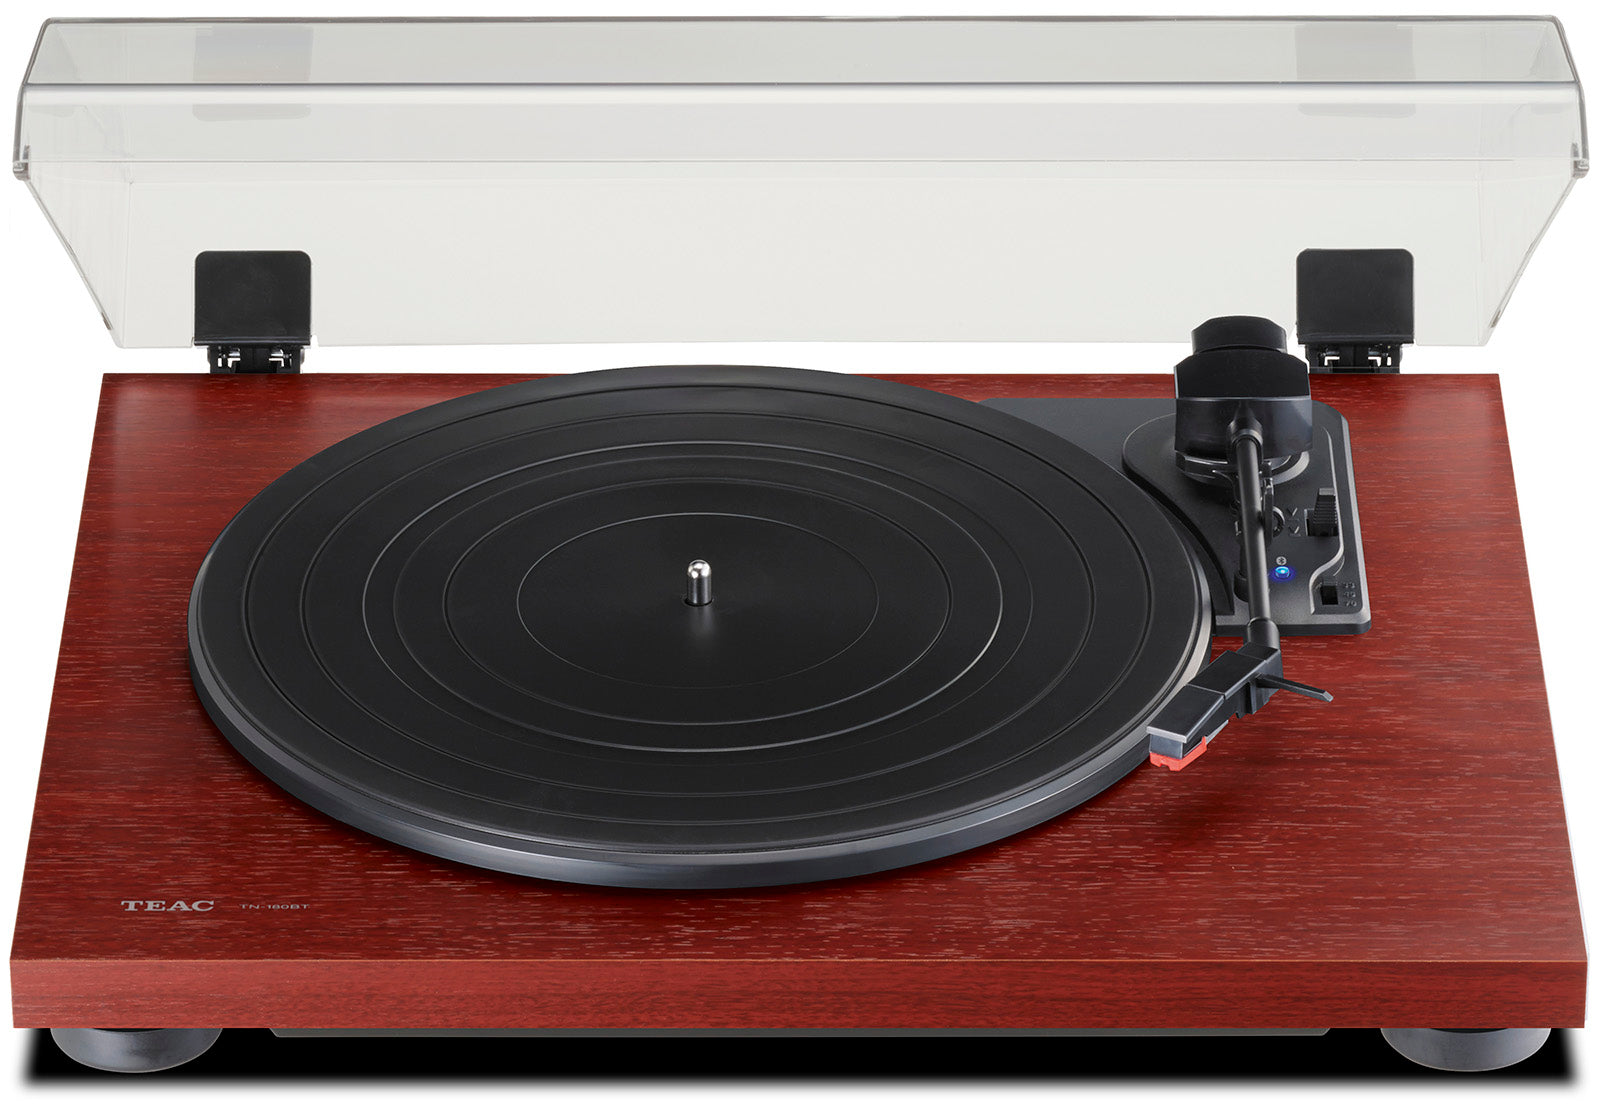 TEAC TN-180BT-A3 BLUETOOTH Analog TURNTABLE for vinyl playback 3-speed Built-in Phono amp